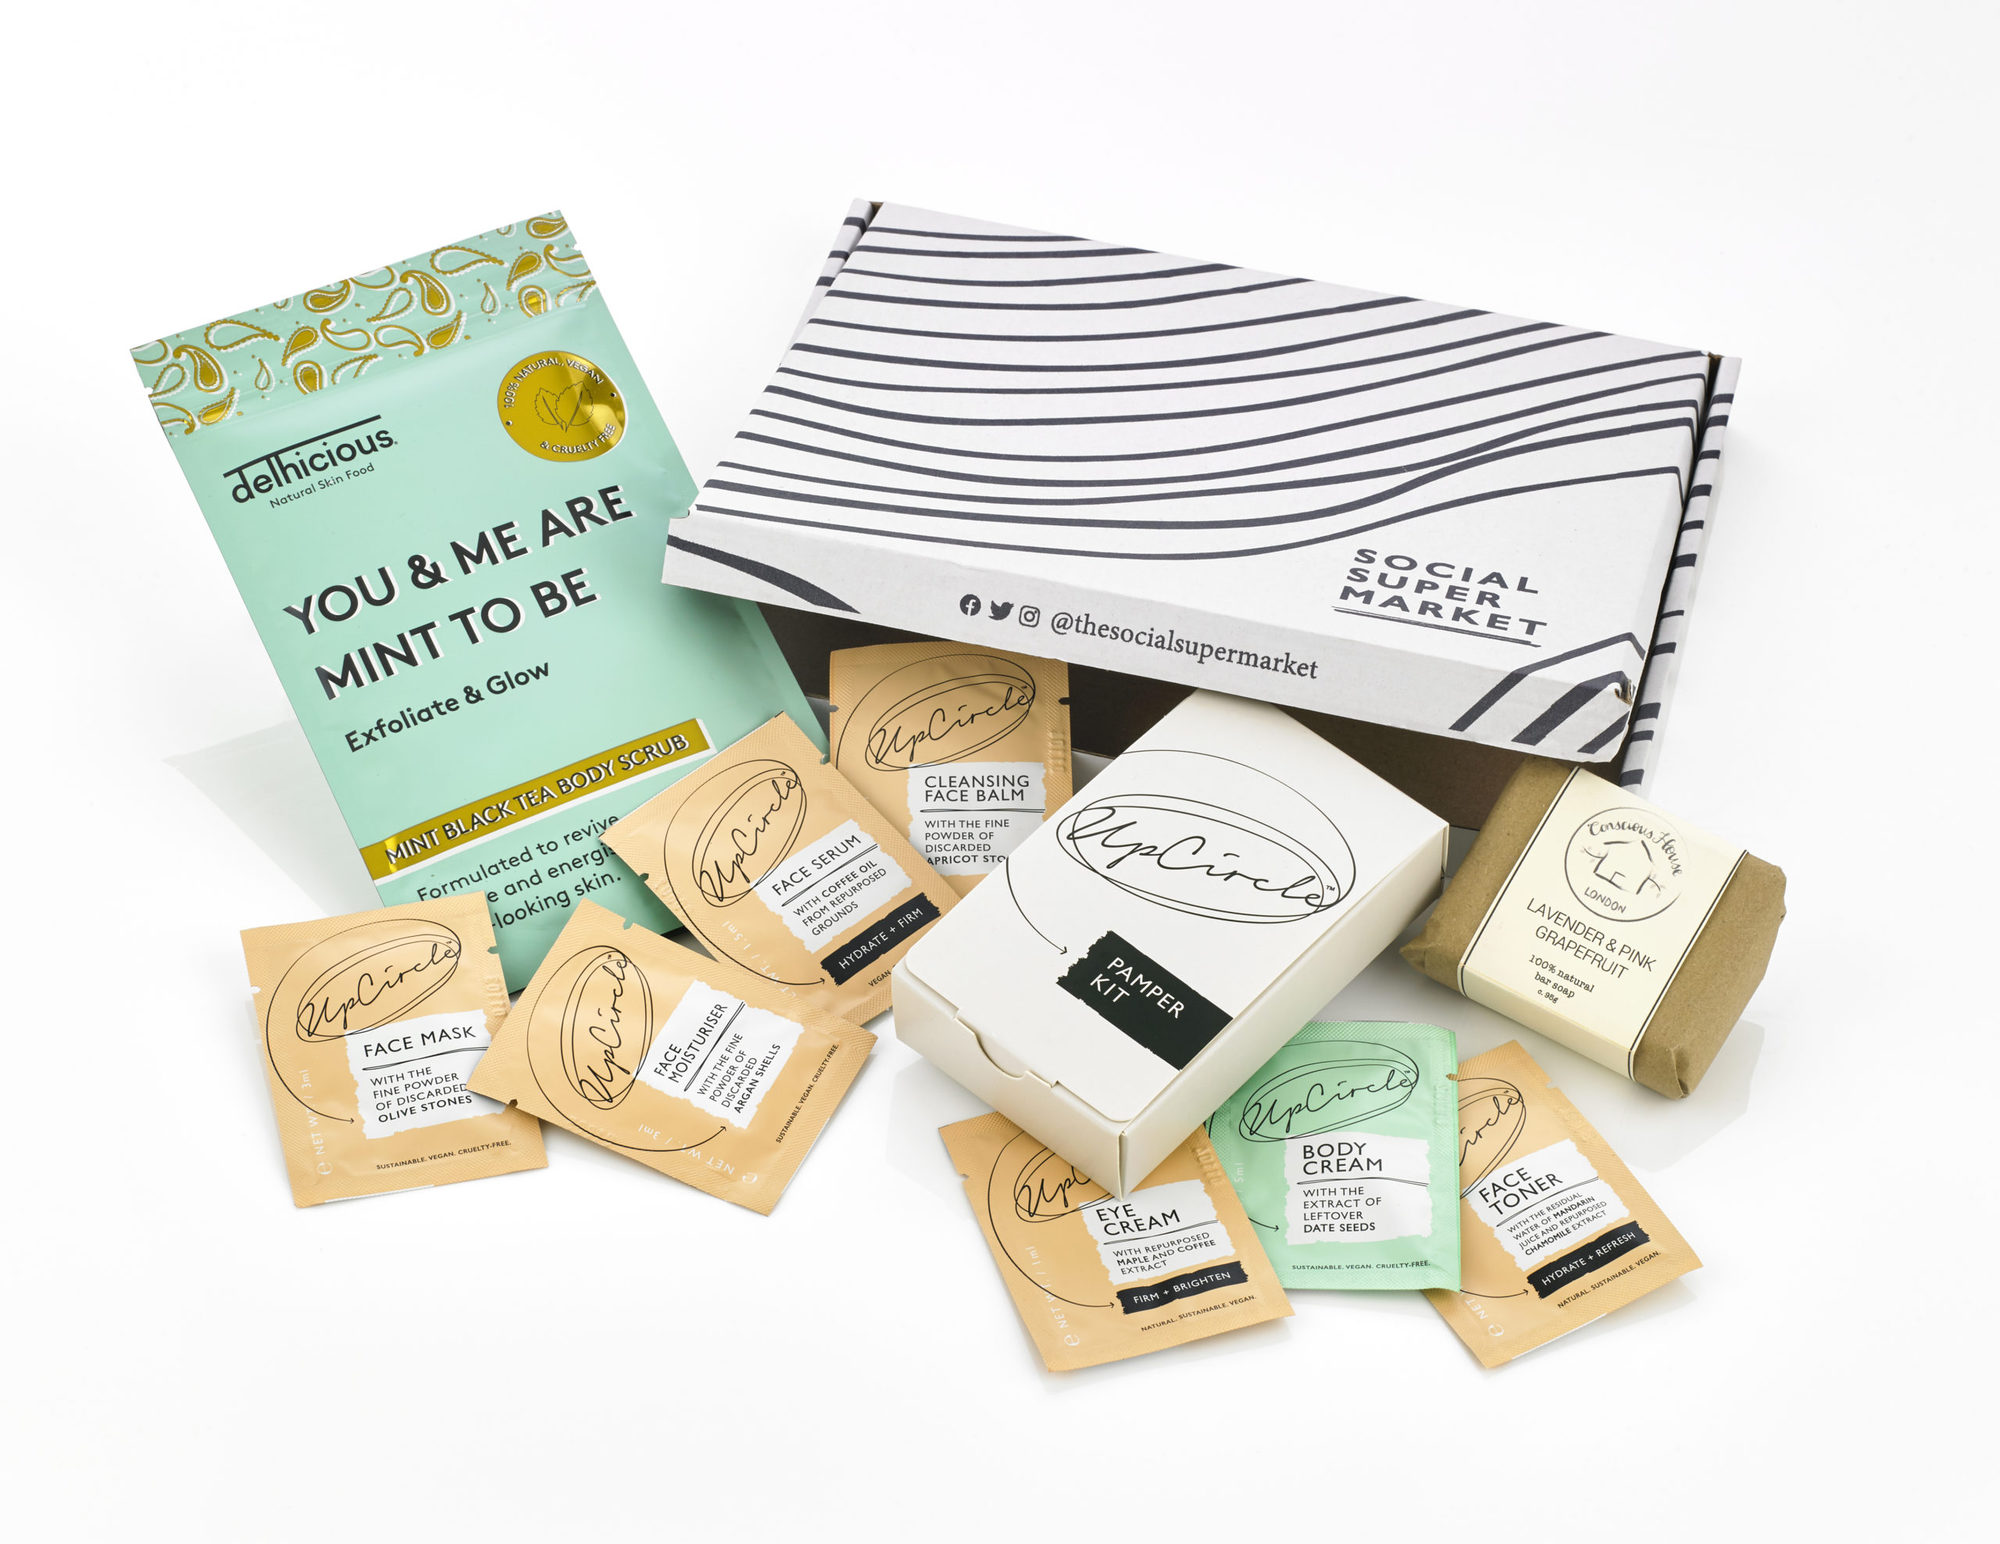 The Pamper Letterbox Gift